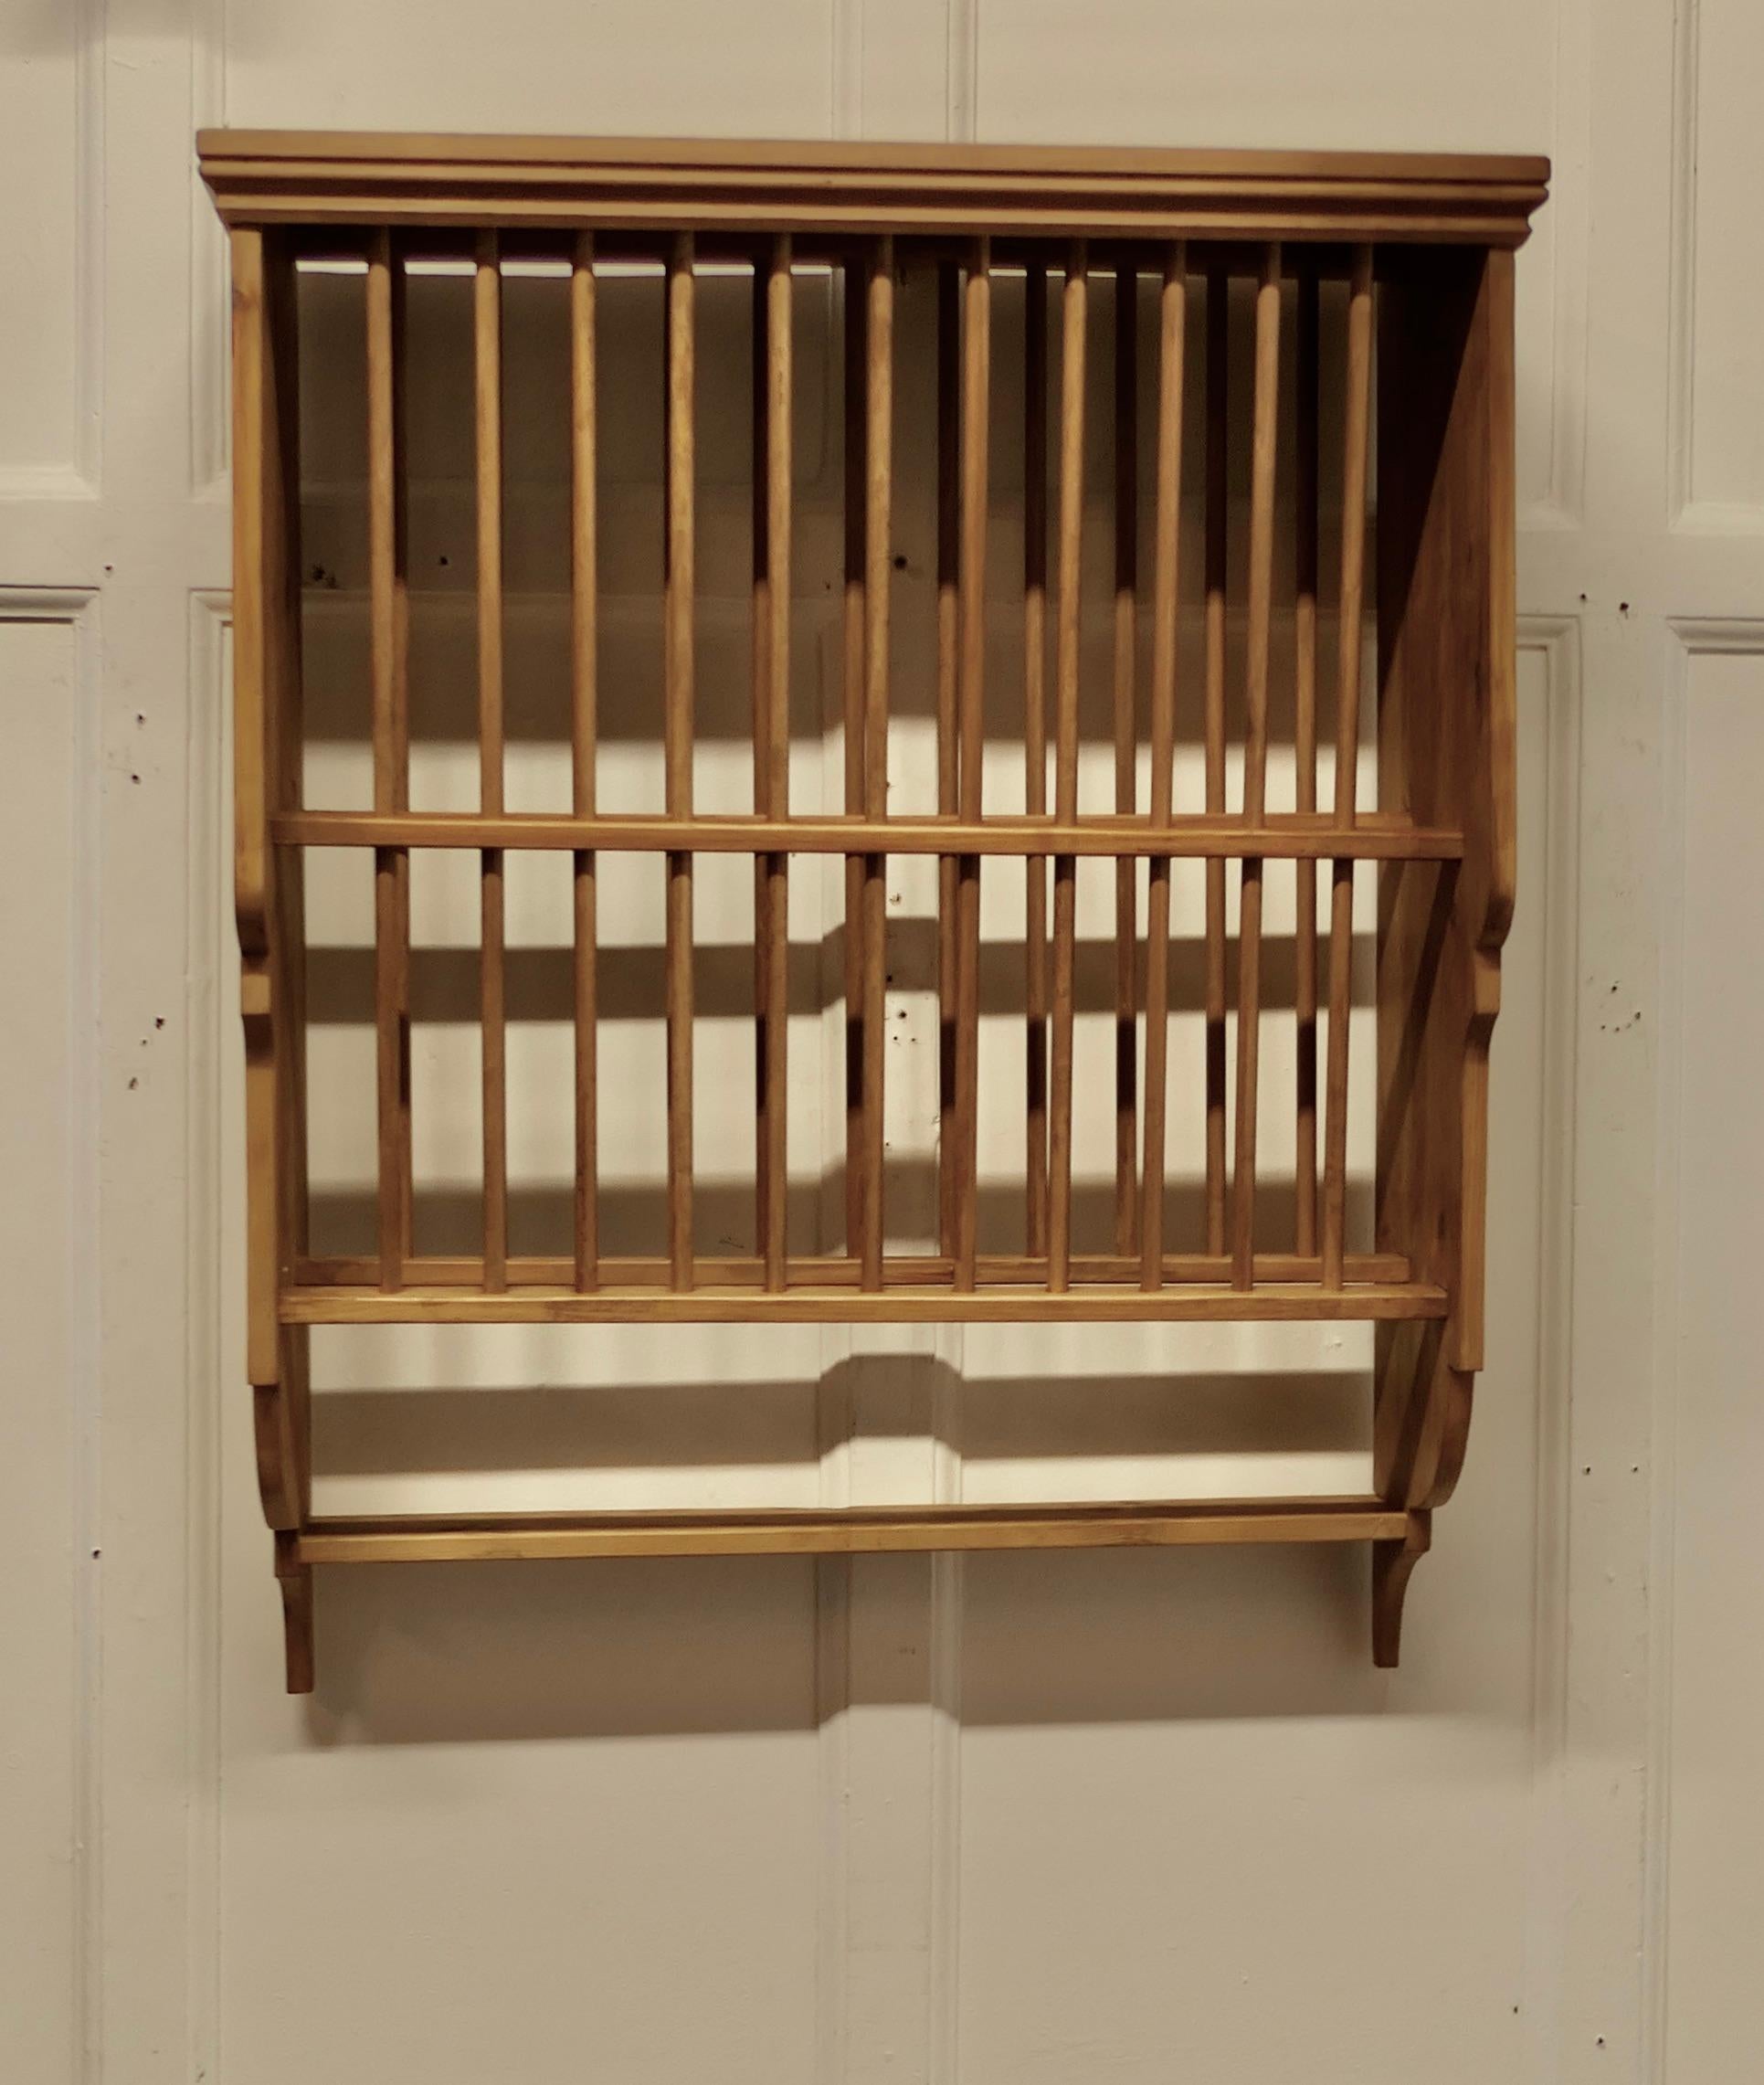 Large Wall Hanging Pine Plate Rack

This useful piece hangs on the wall and drains and stores plates until required
It has a pine frame and wooden dowels with a waterfall shape, allowing 2 rows of plates to be stored at any one time, below there is